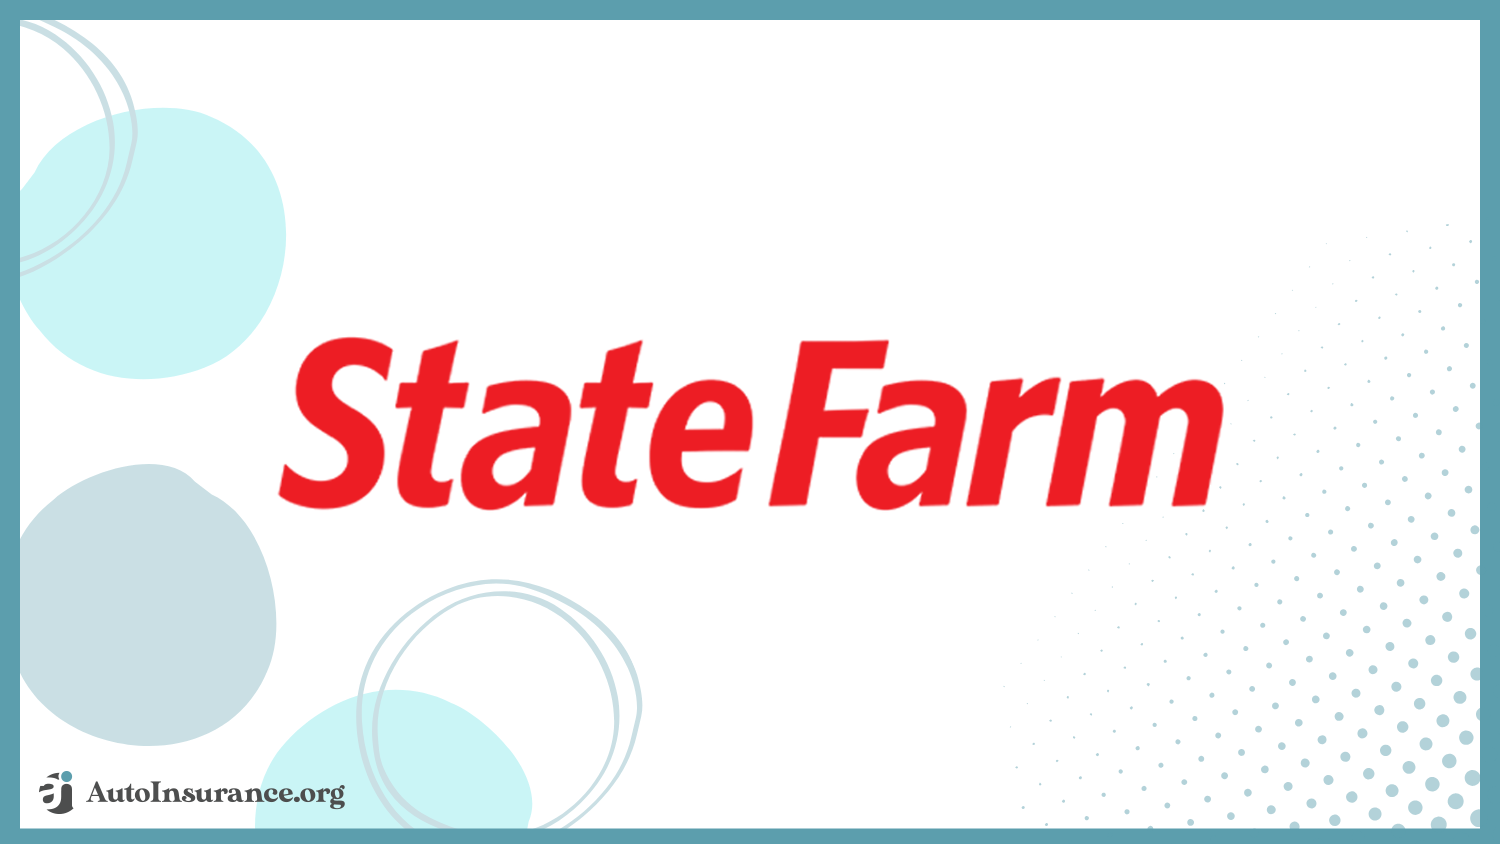 State Farm: cheap auto insurance after an accident